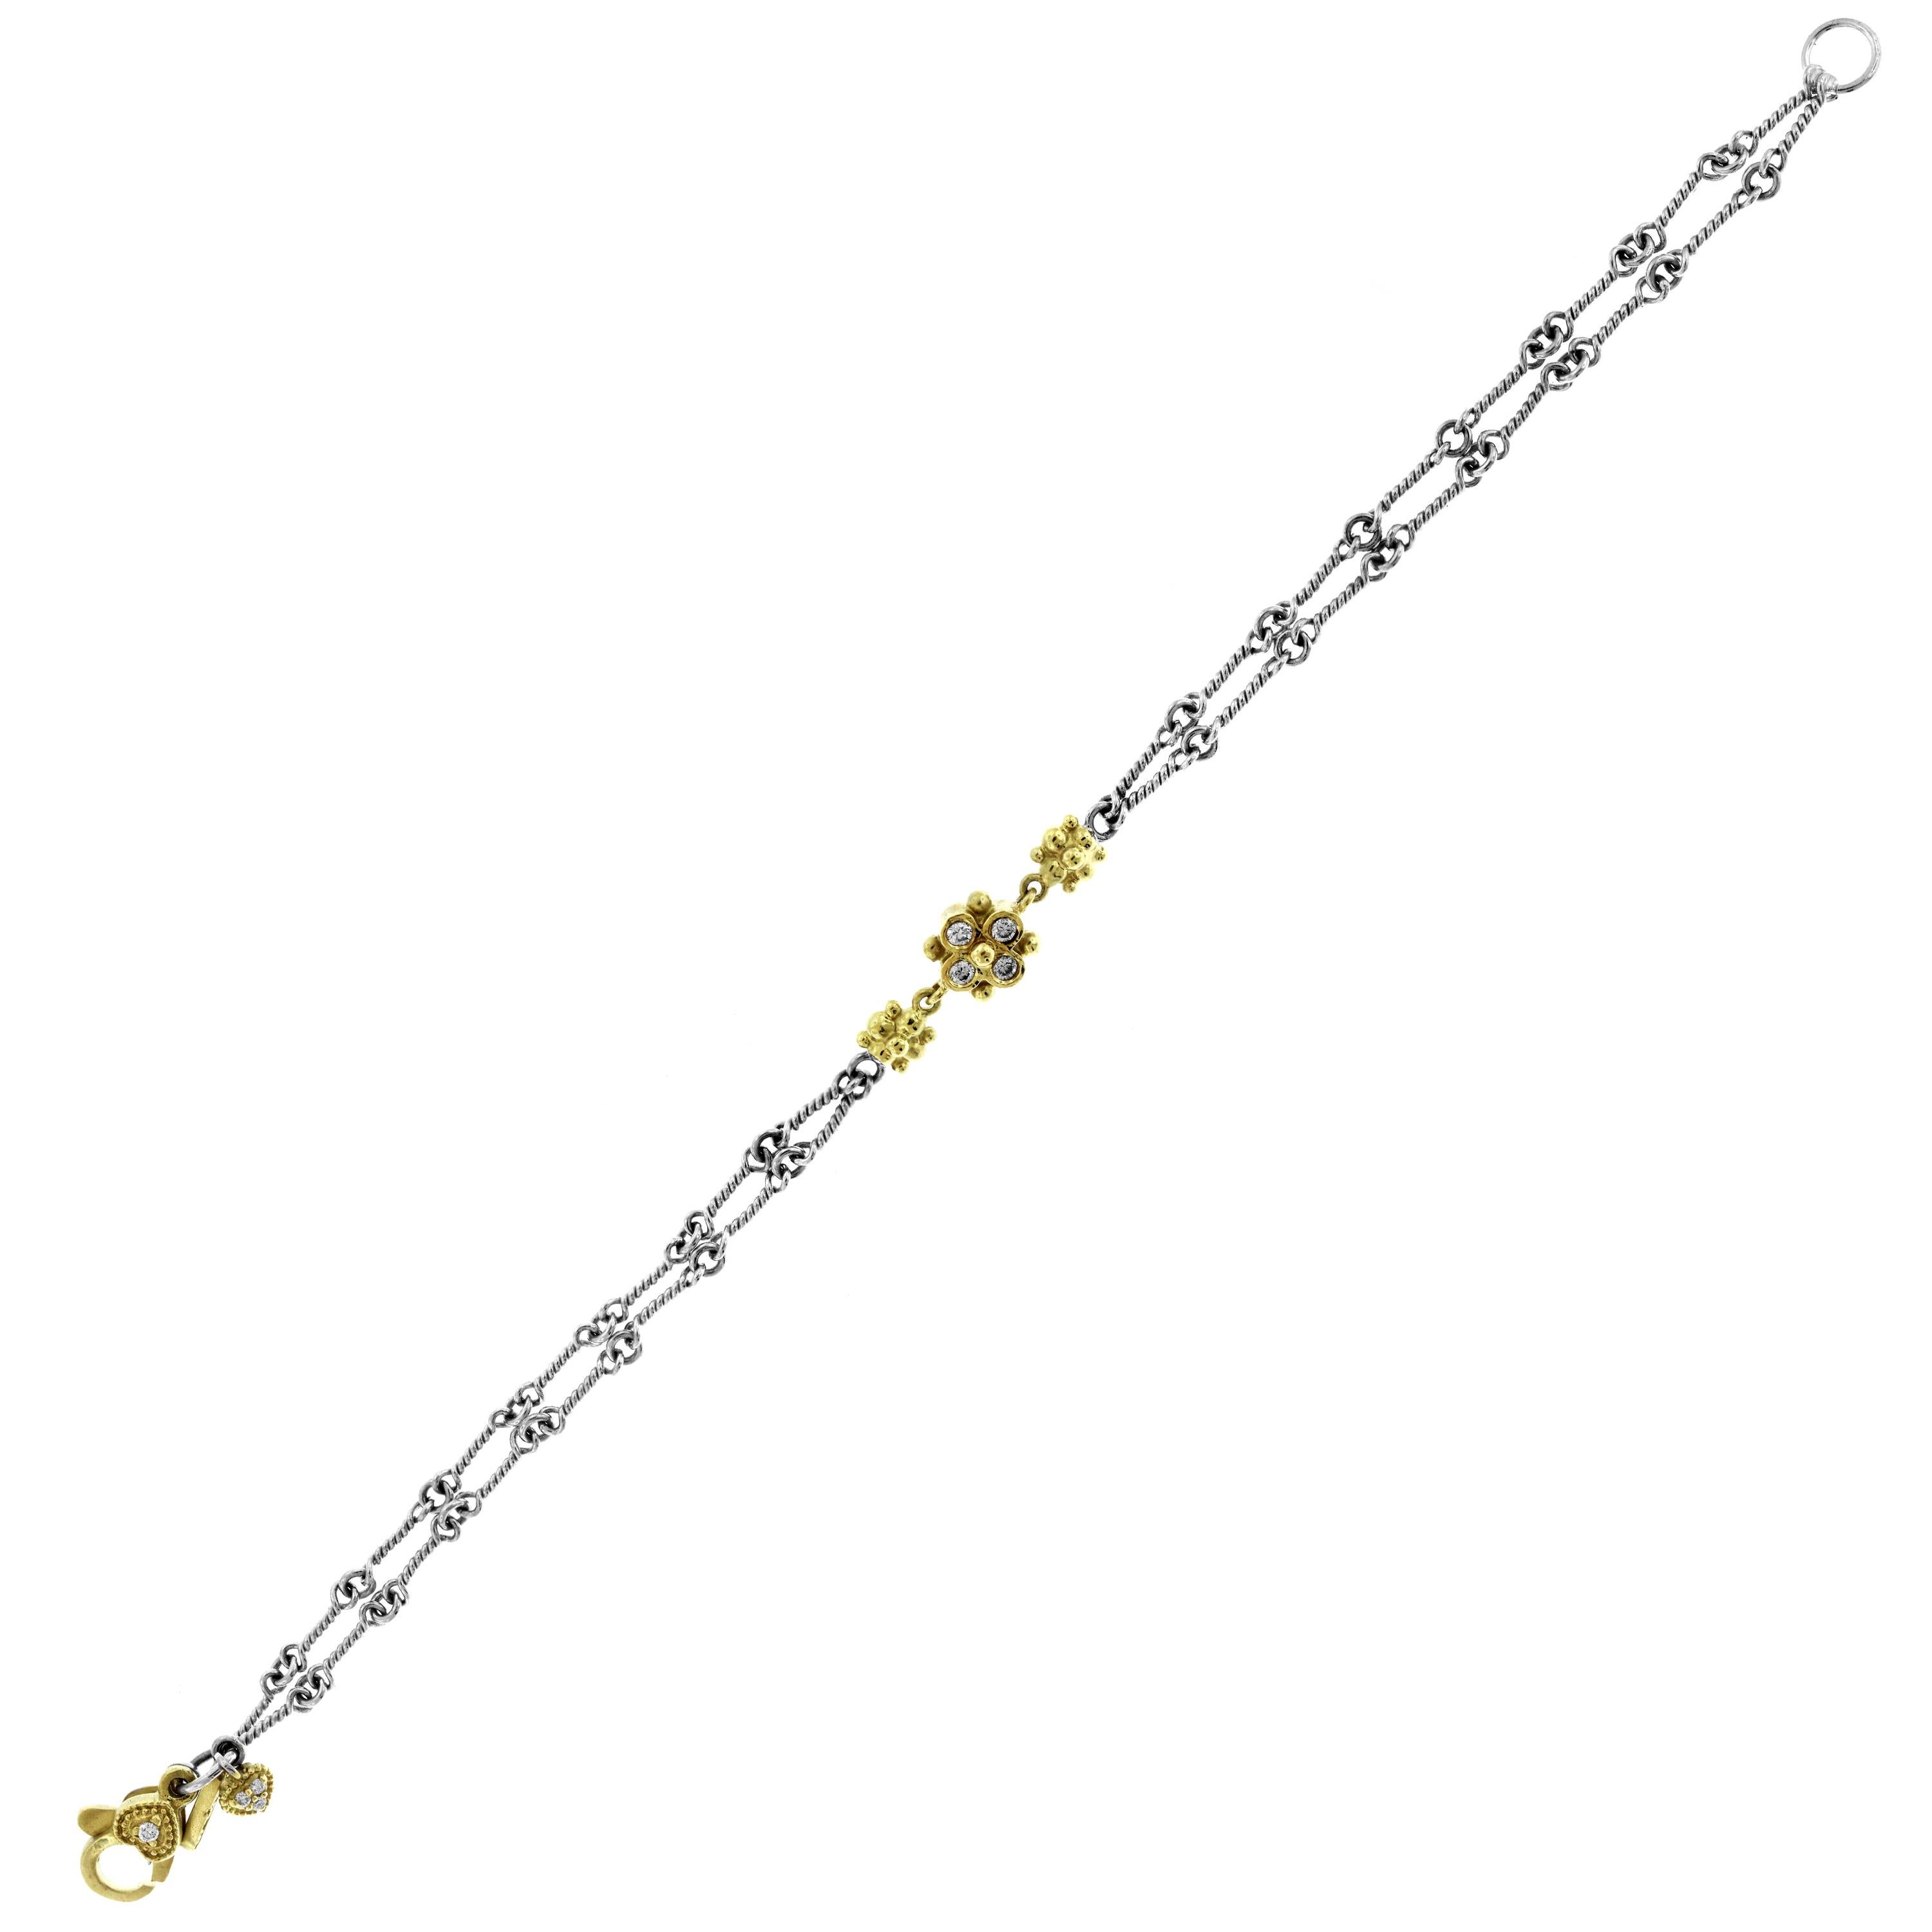 IF YOU ARE REALLY INTERESTED, CONTACT US WITH ANY REASONABLE OFFER. WE WILL TRY OUR BEST TO MAKE YOU HAPPY!

18K Yellow and White Gold Two-Tone Gold Chain Bracelet with Diamond Floral Cluster by Stambolian

This is a double link chain bracelet